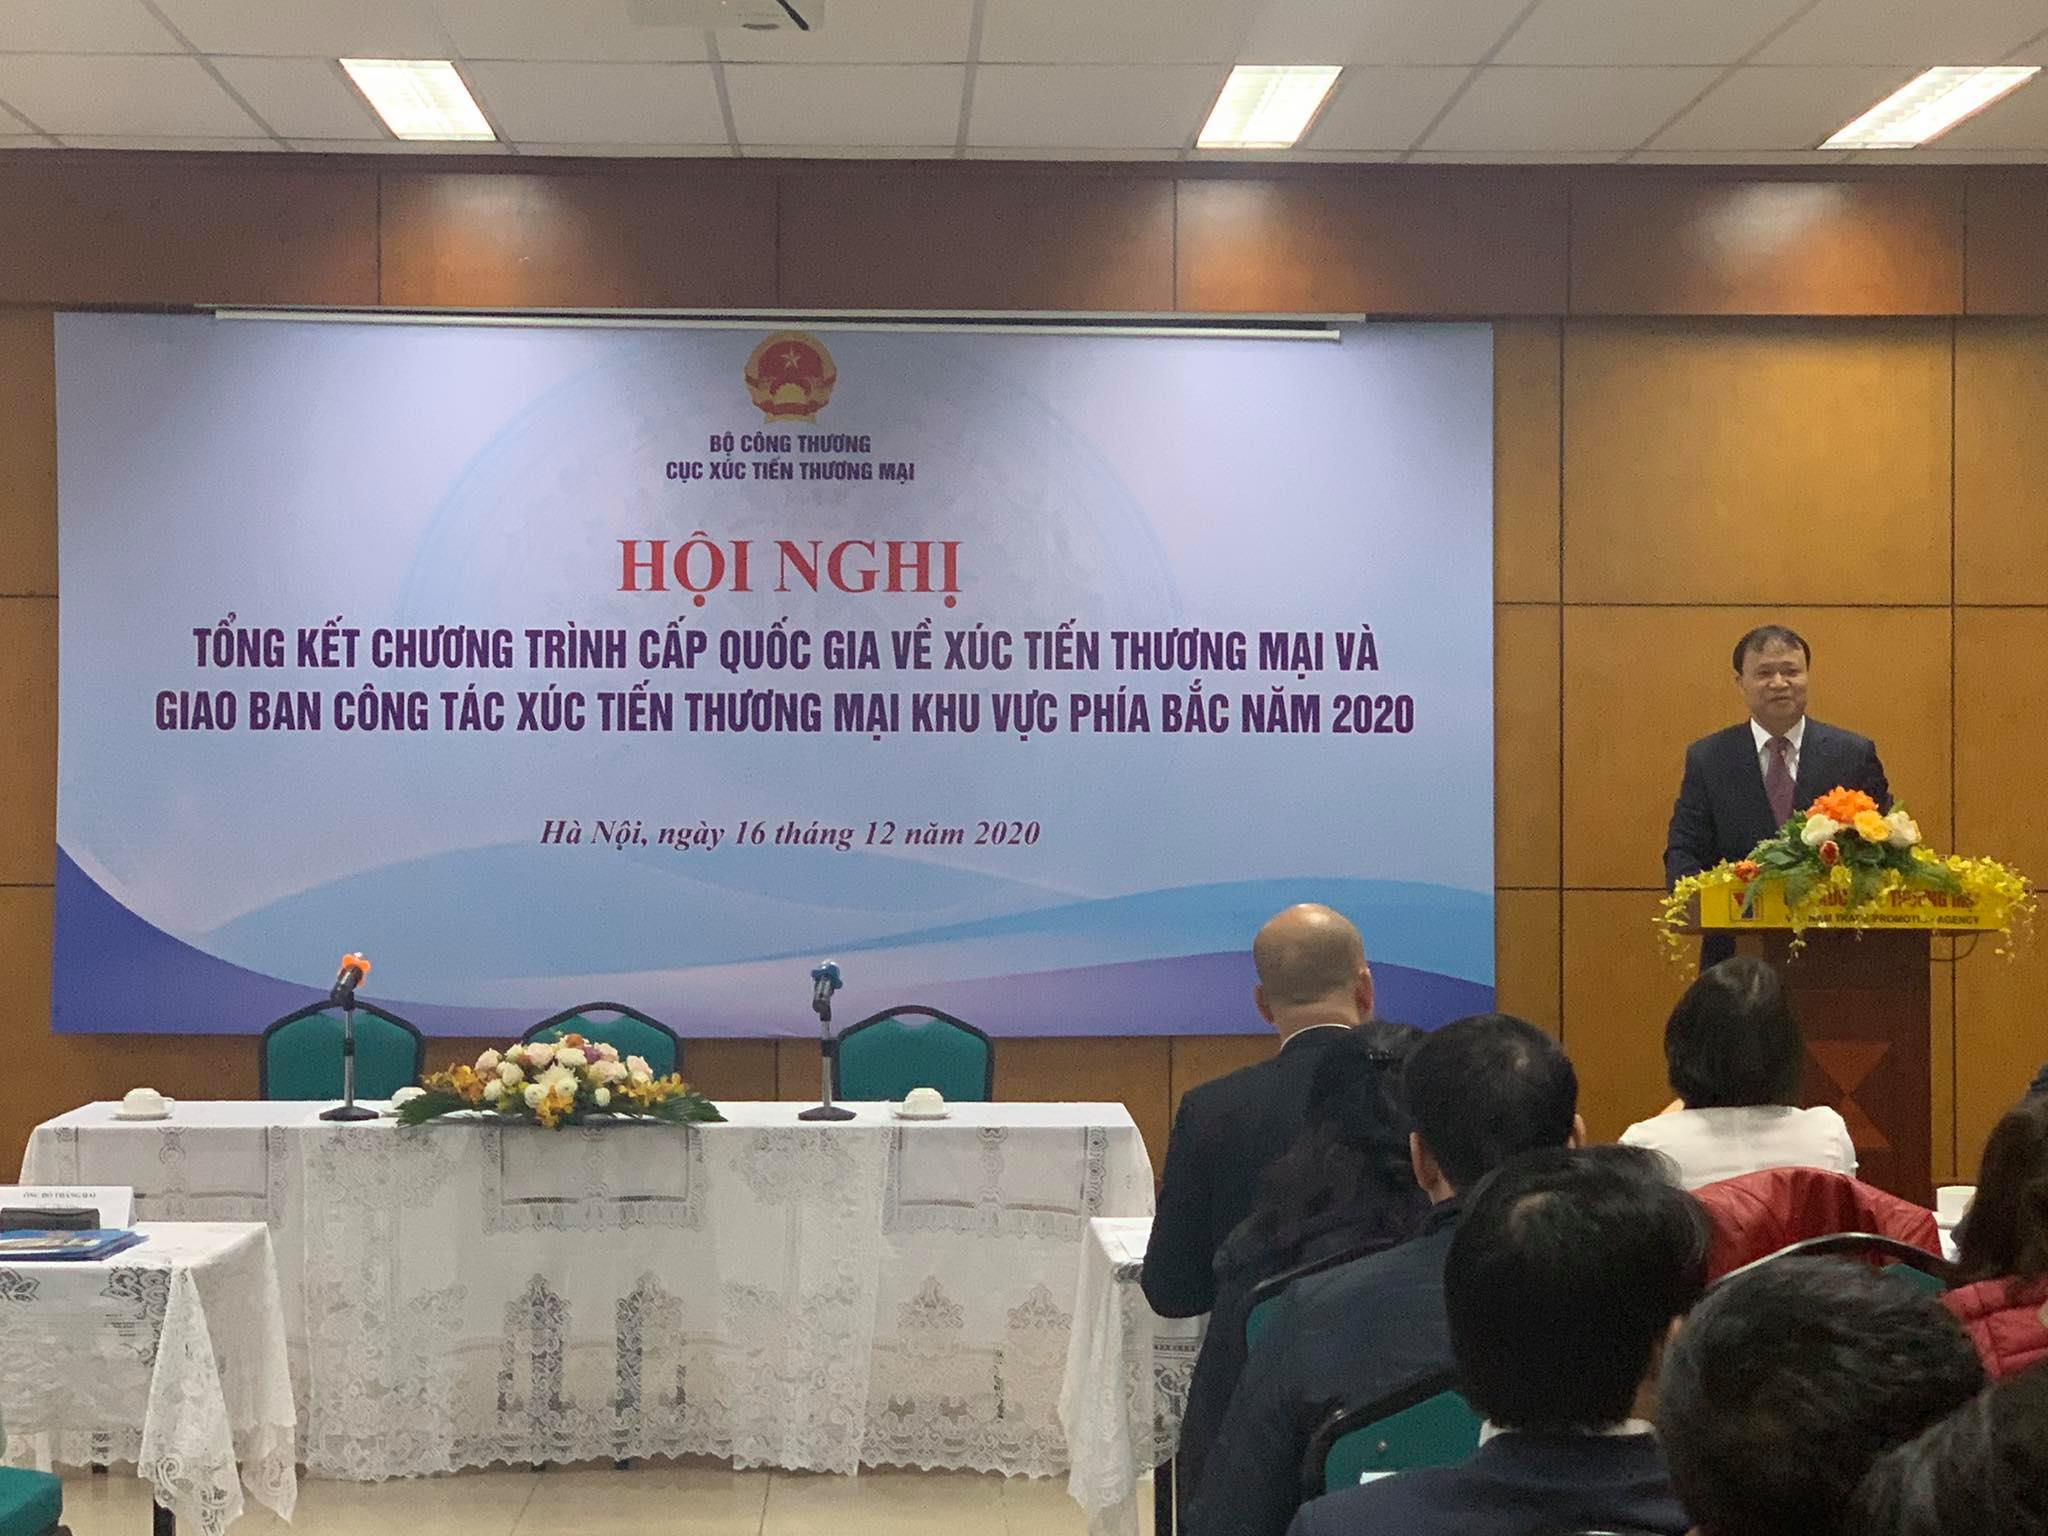 Activities eligible to be provided with assistance from the national trade promotion program in Vietnam